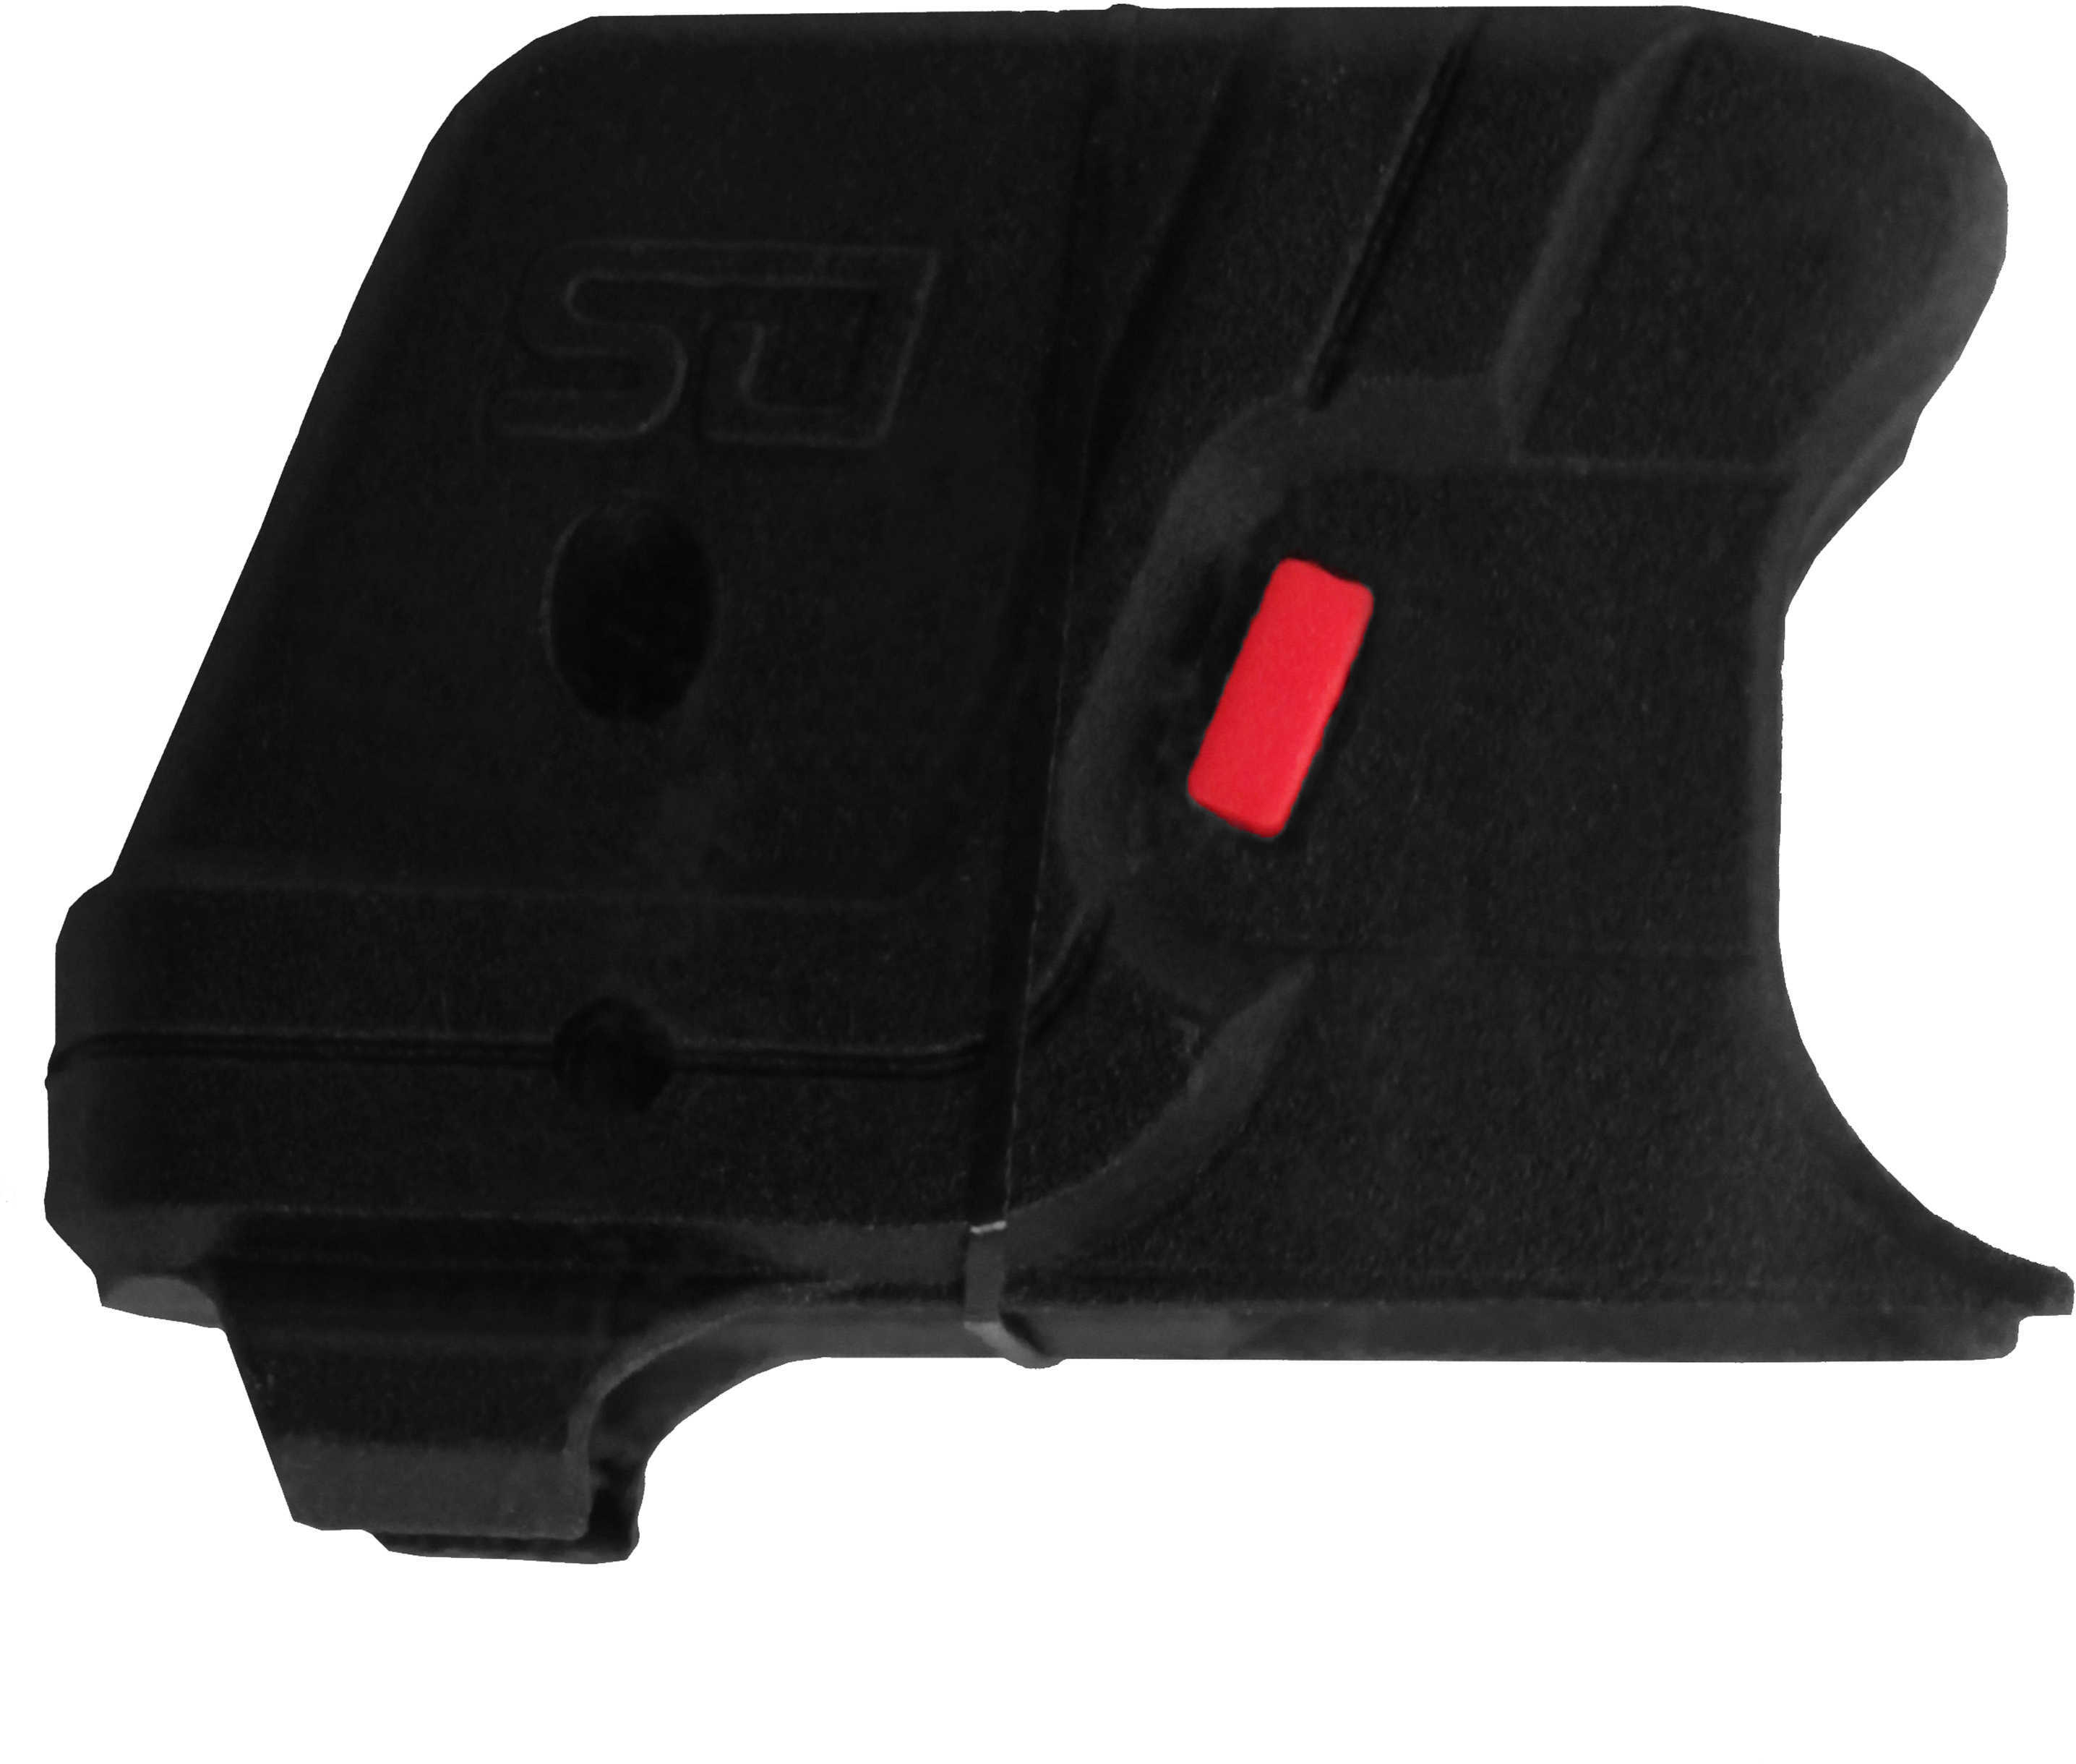 Crimson Trace Corporation Defender Series Accu-Guard Laser For Glock Full-Size and Compact Black Finish DS-121